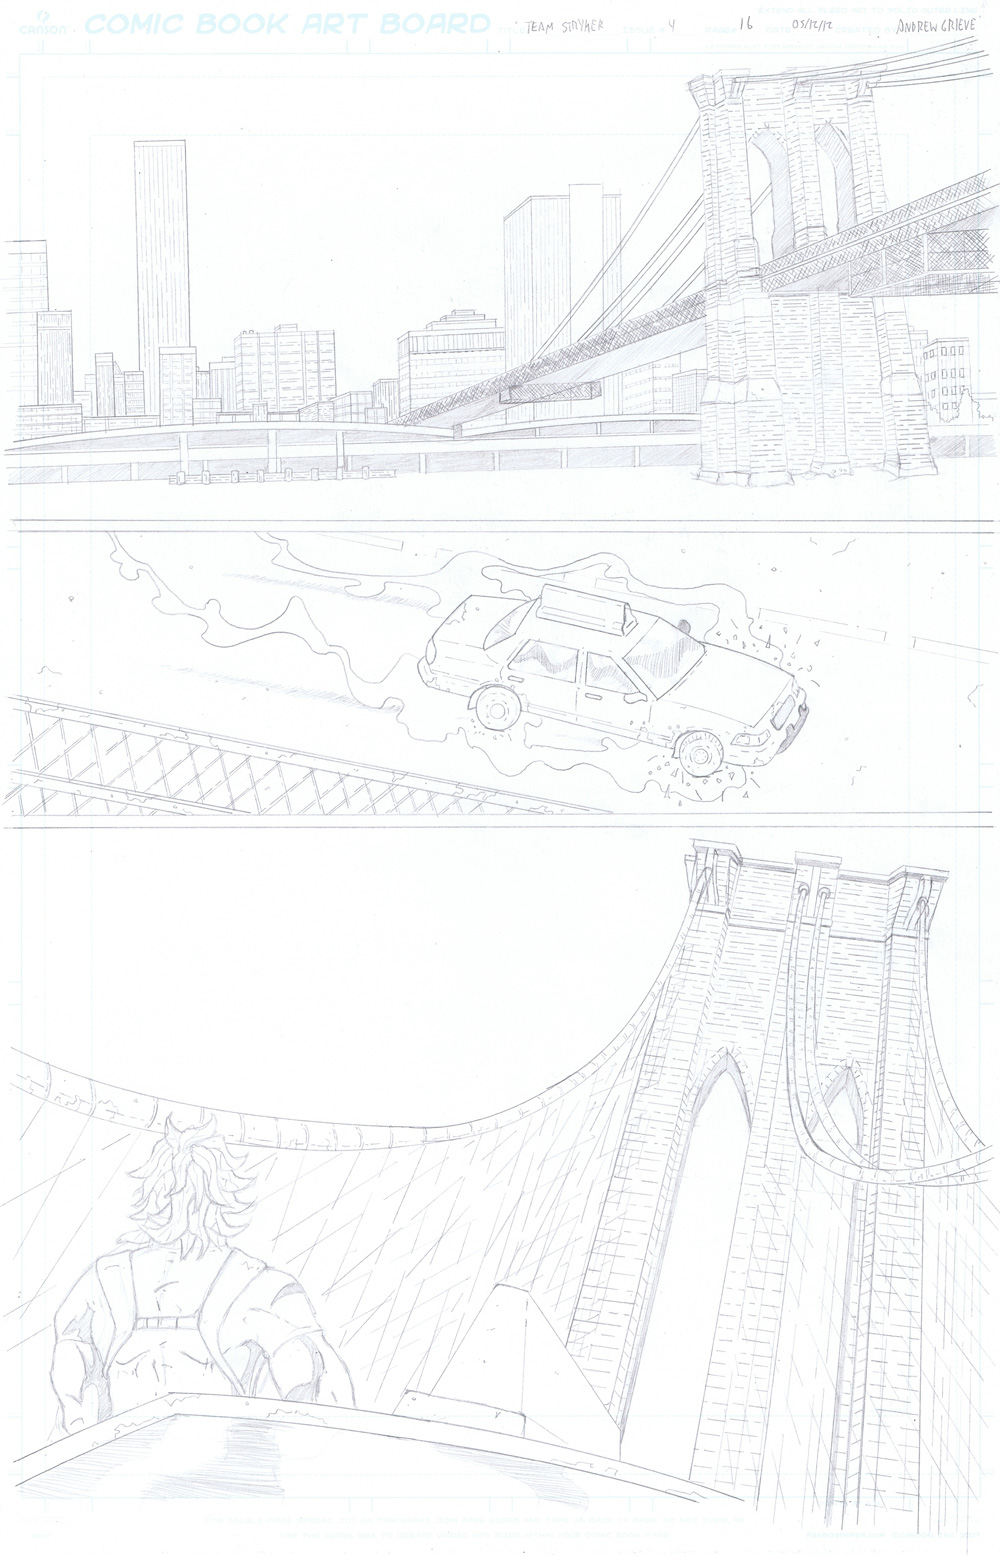 MISSION 004: PAGE 16 PENCIL